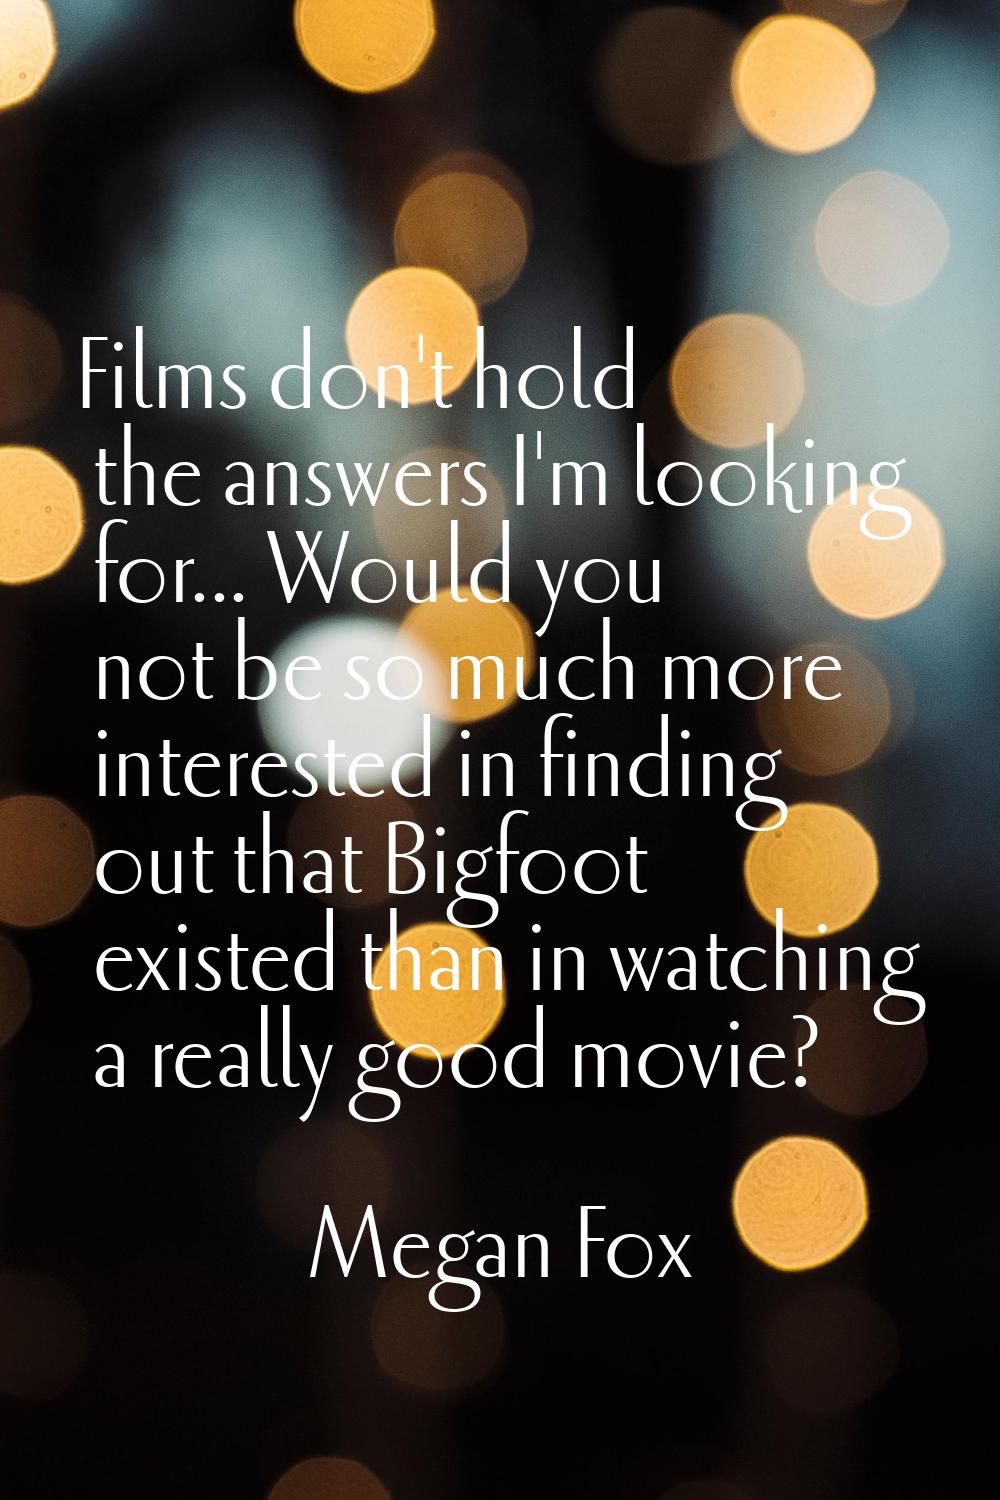 Films don't hold the answers I'm looking for... Would you not be so much more interested in finding